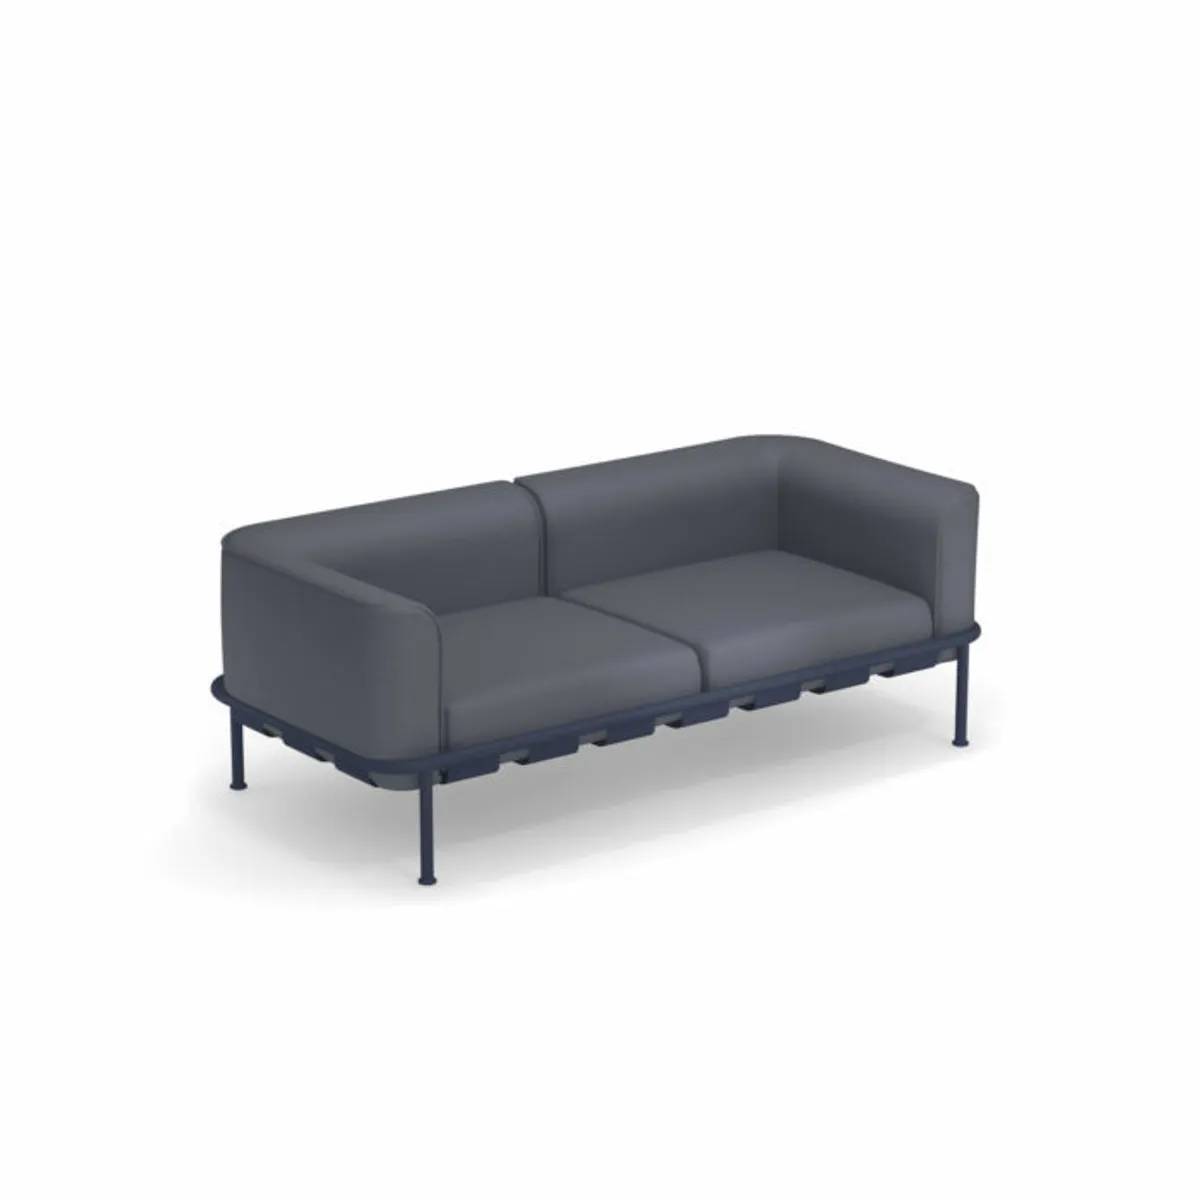 Dock 2 Seater Sofa 48 Outdoor Use Inside Out Contracst